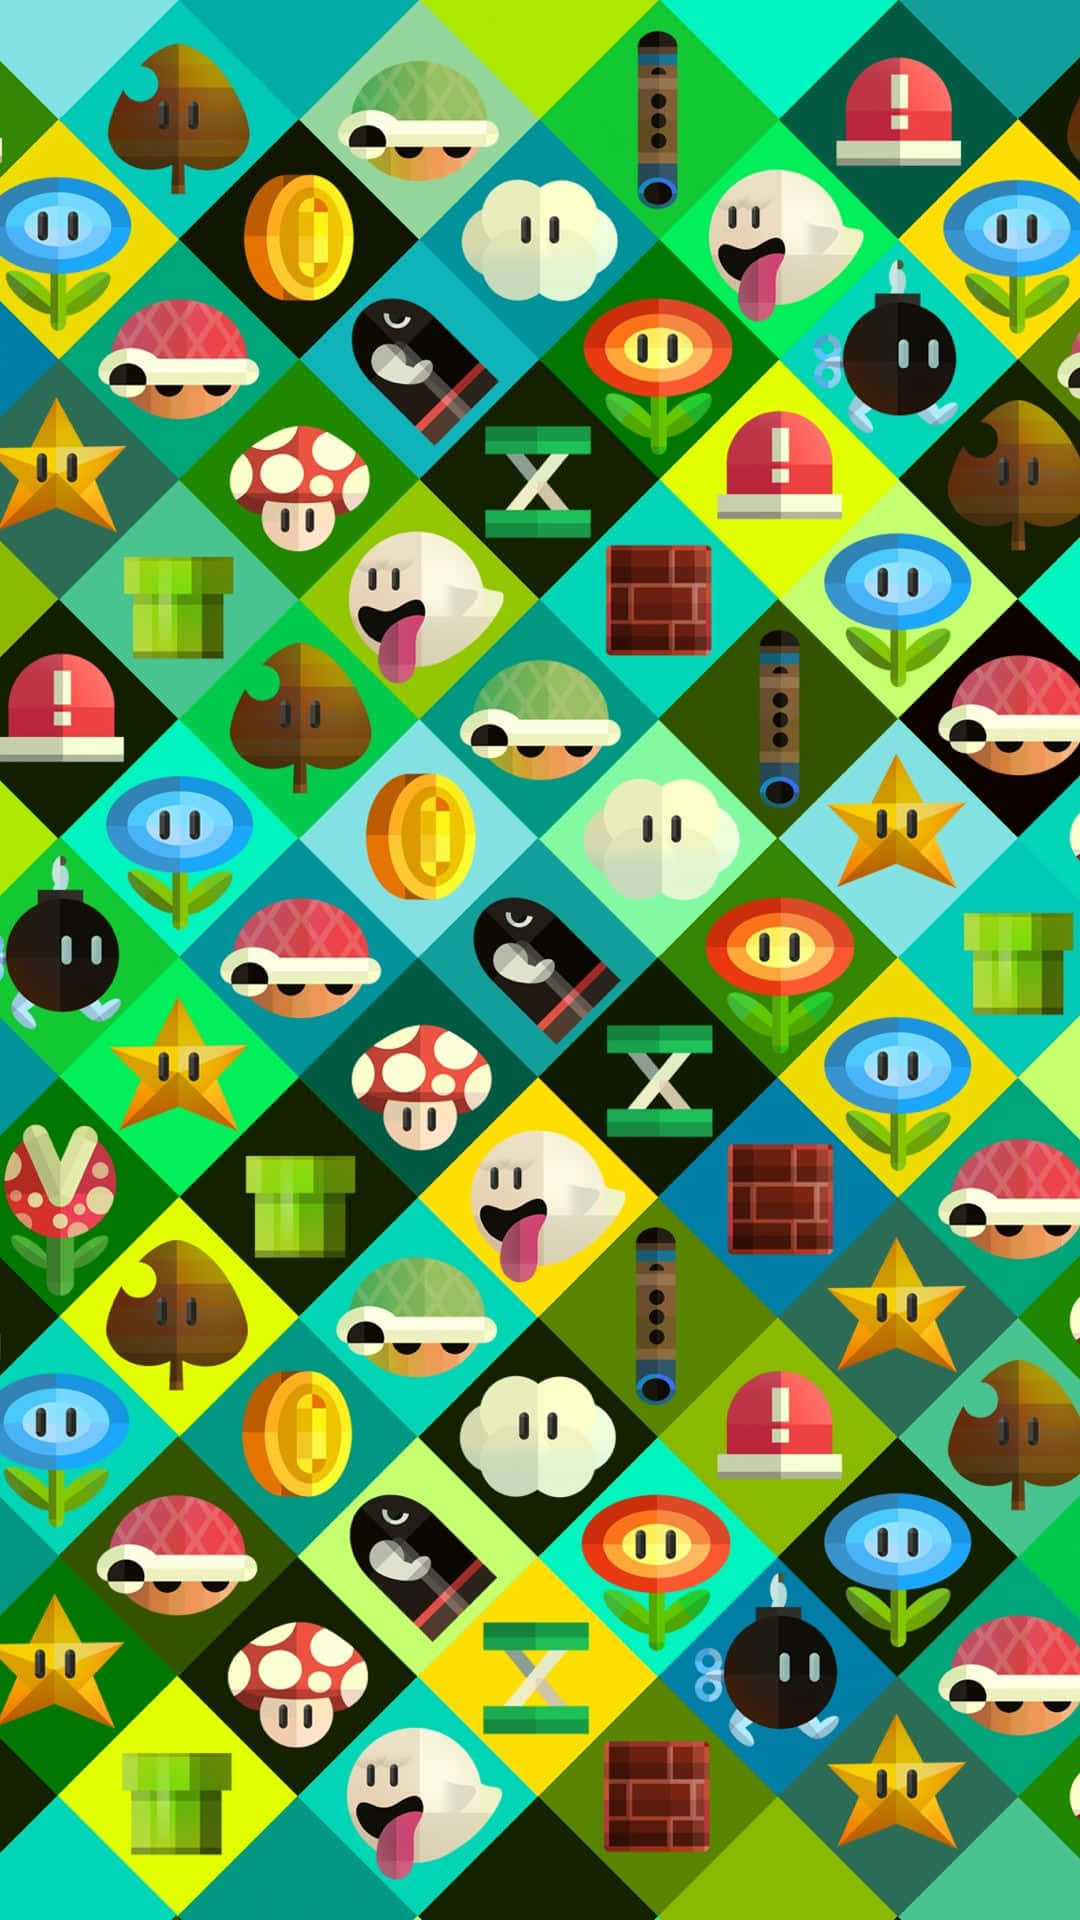 Have Fun with Super Mario on Your iPhone! Wallpaper